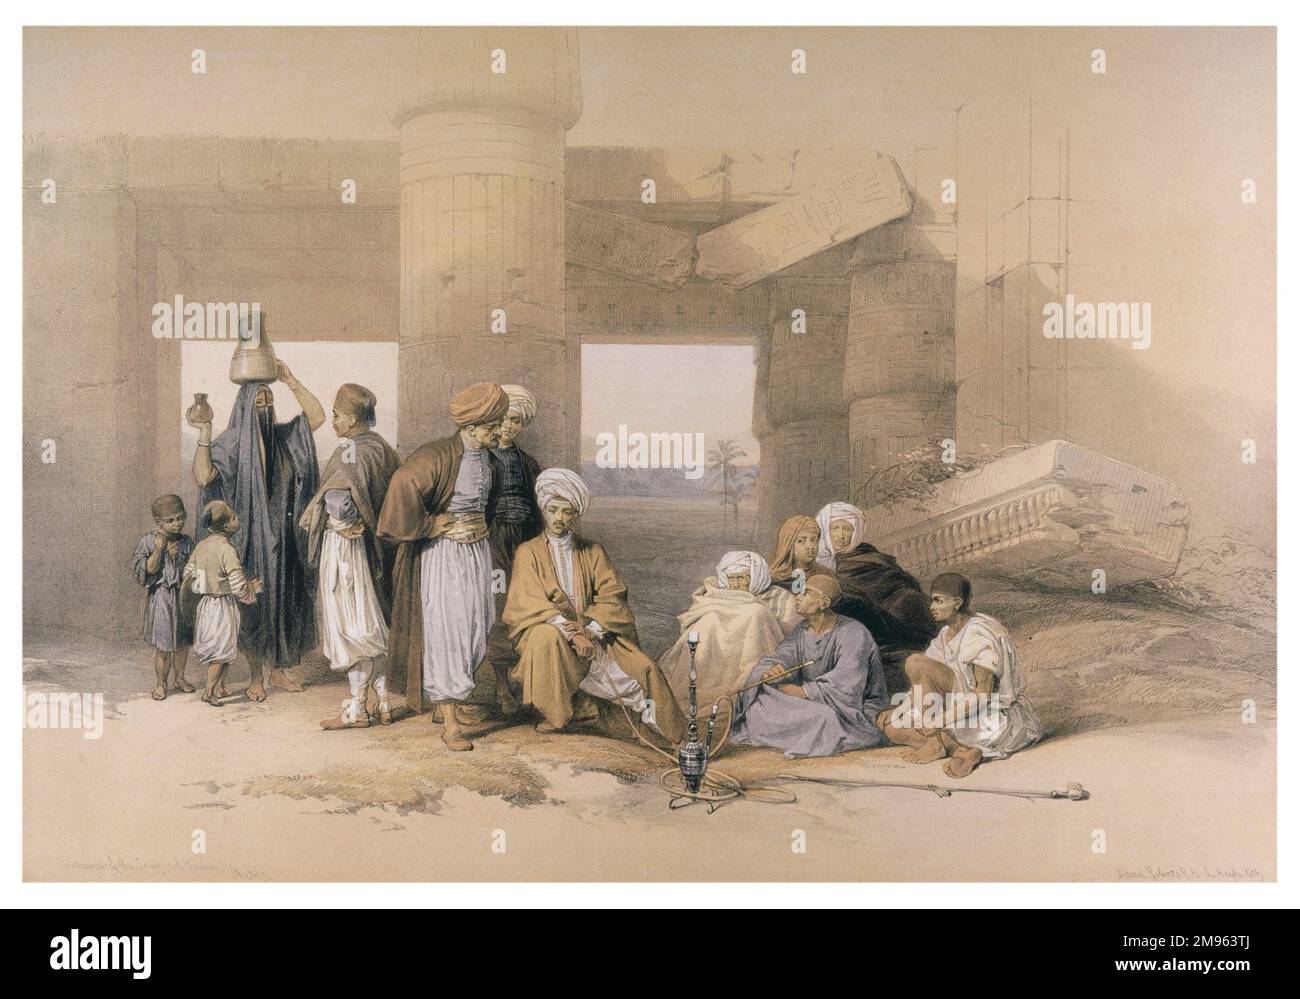 Local men women and children sit amid the fallen stones of the entrance to the Temple of Amun, Thebes. Stock Photo